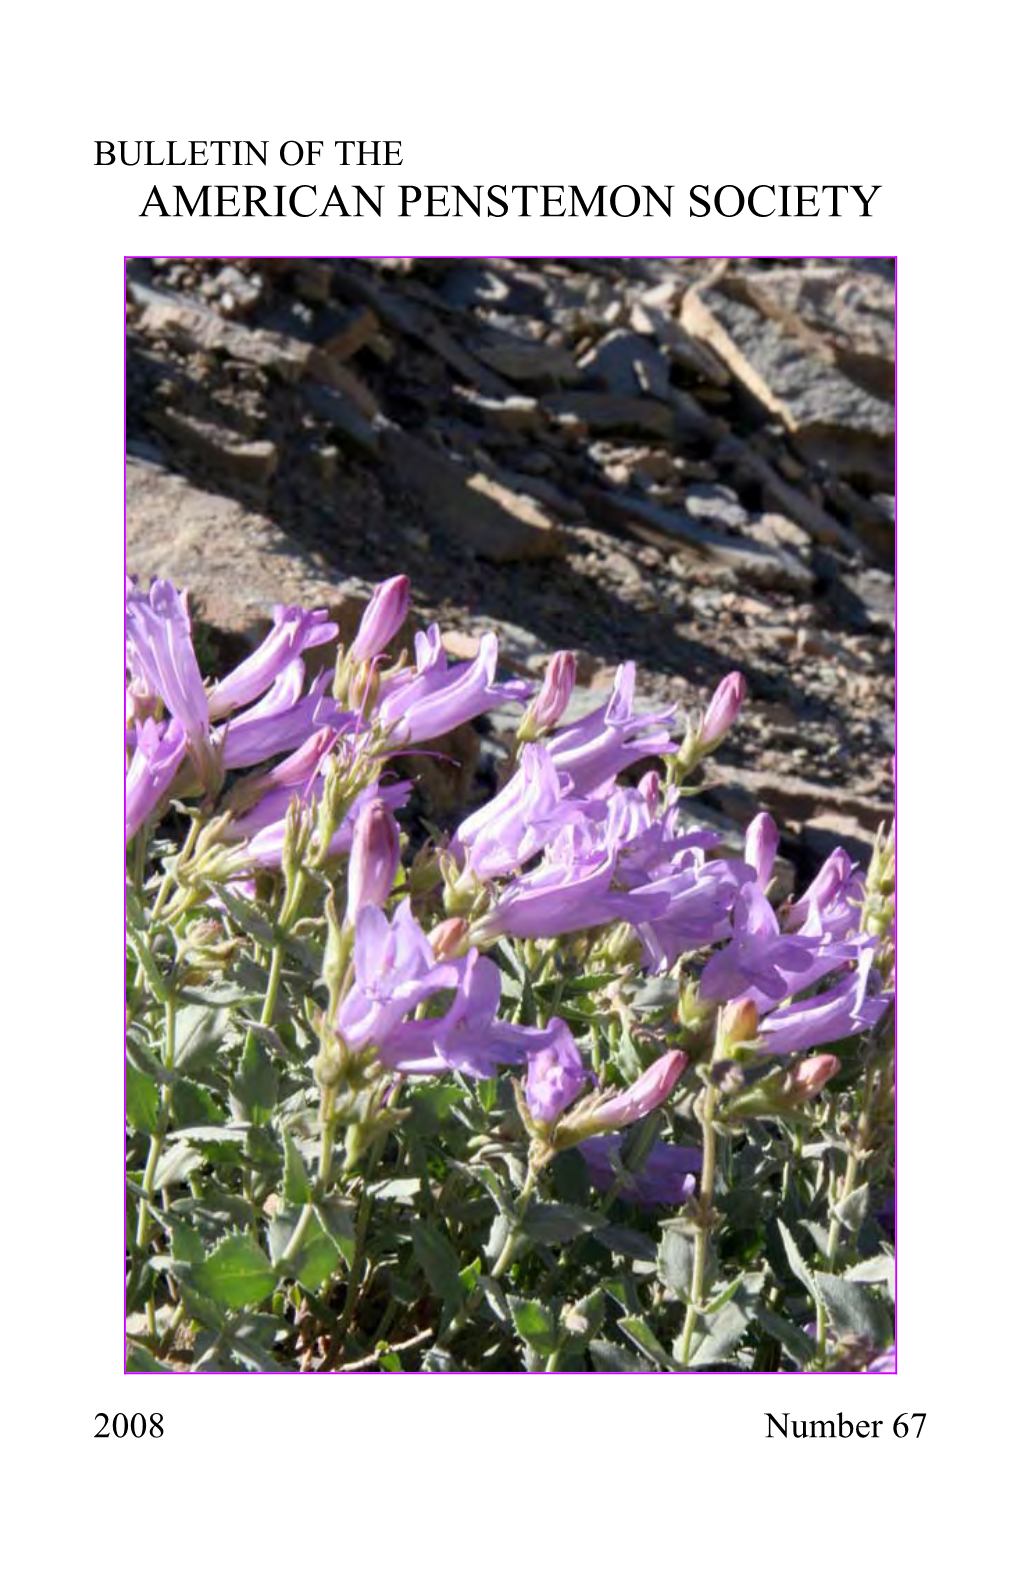 Penstemon in Chihuahua, Mexico 7 by Dale Lindgren